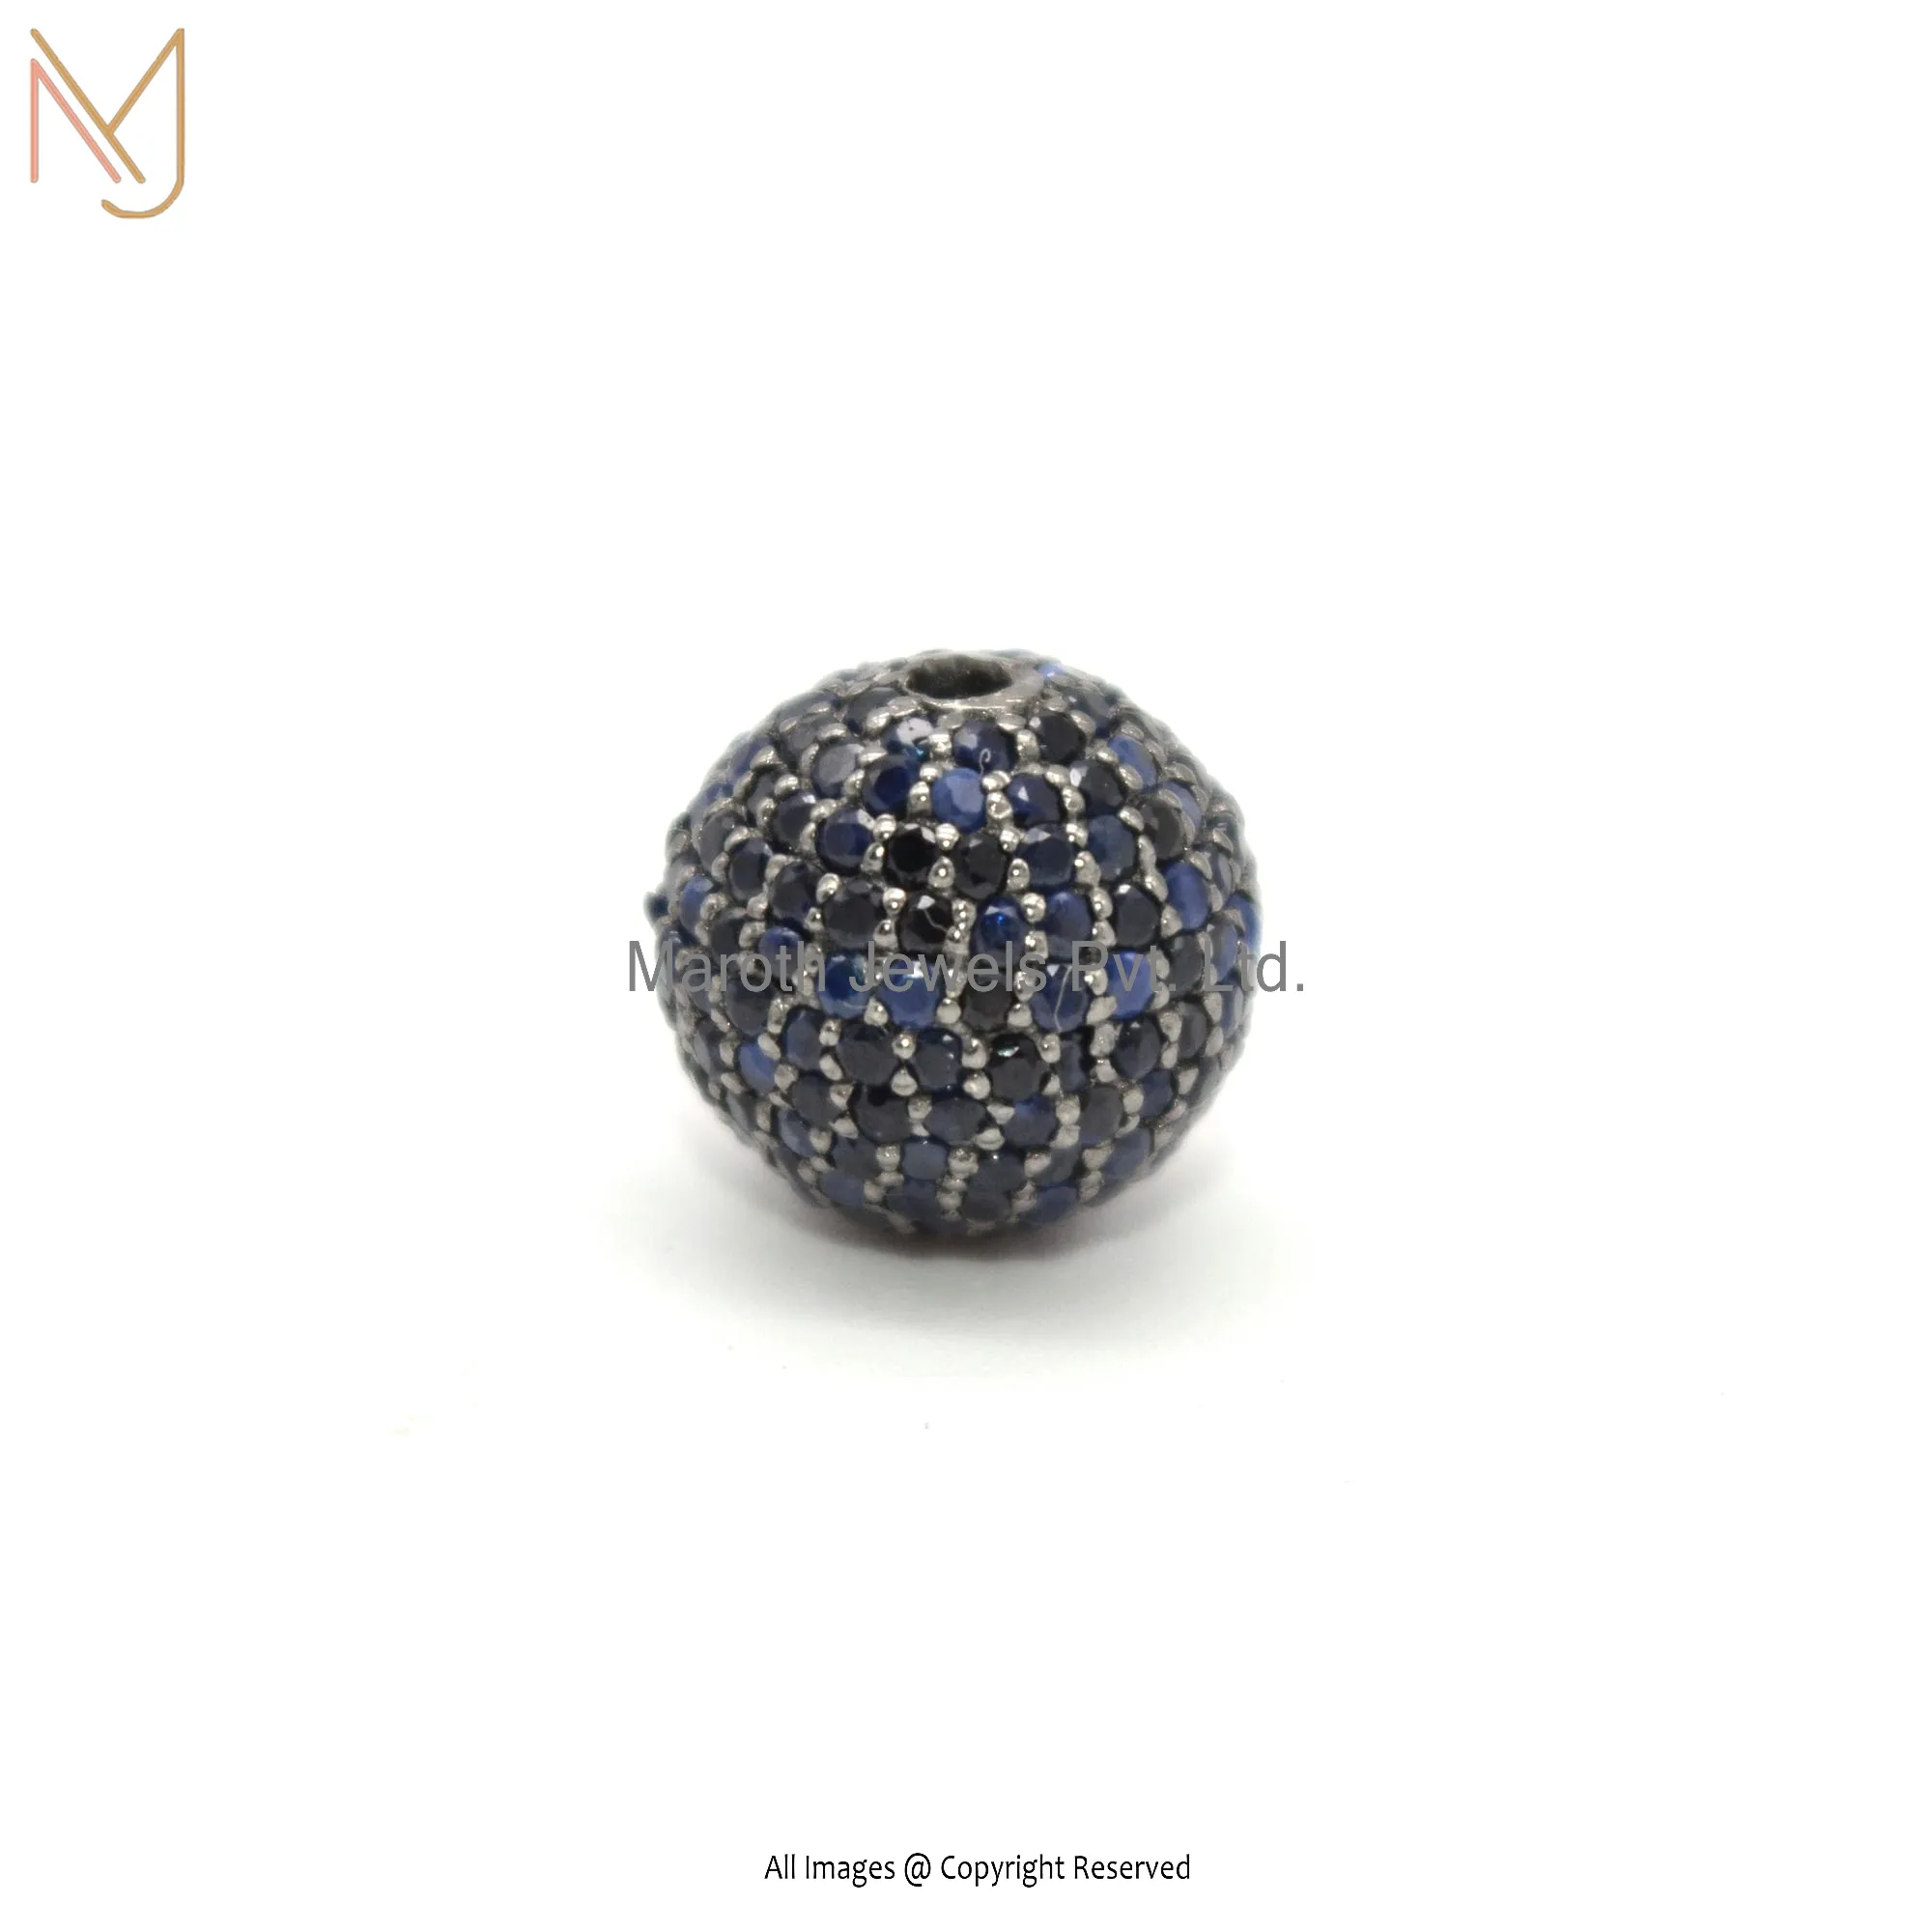 Private Label 925 Natural Silver Pave Blue Sapphire Round Beads Finding